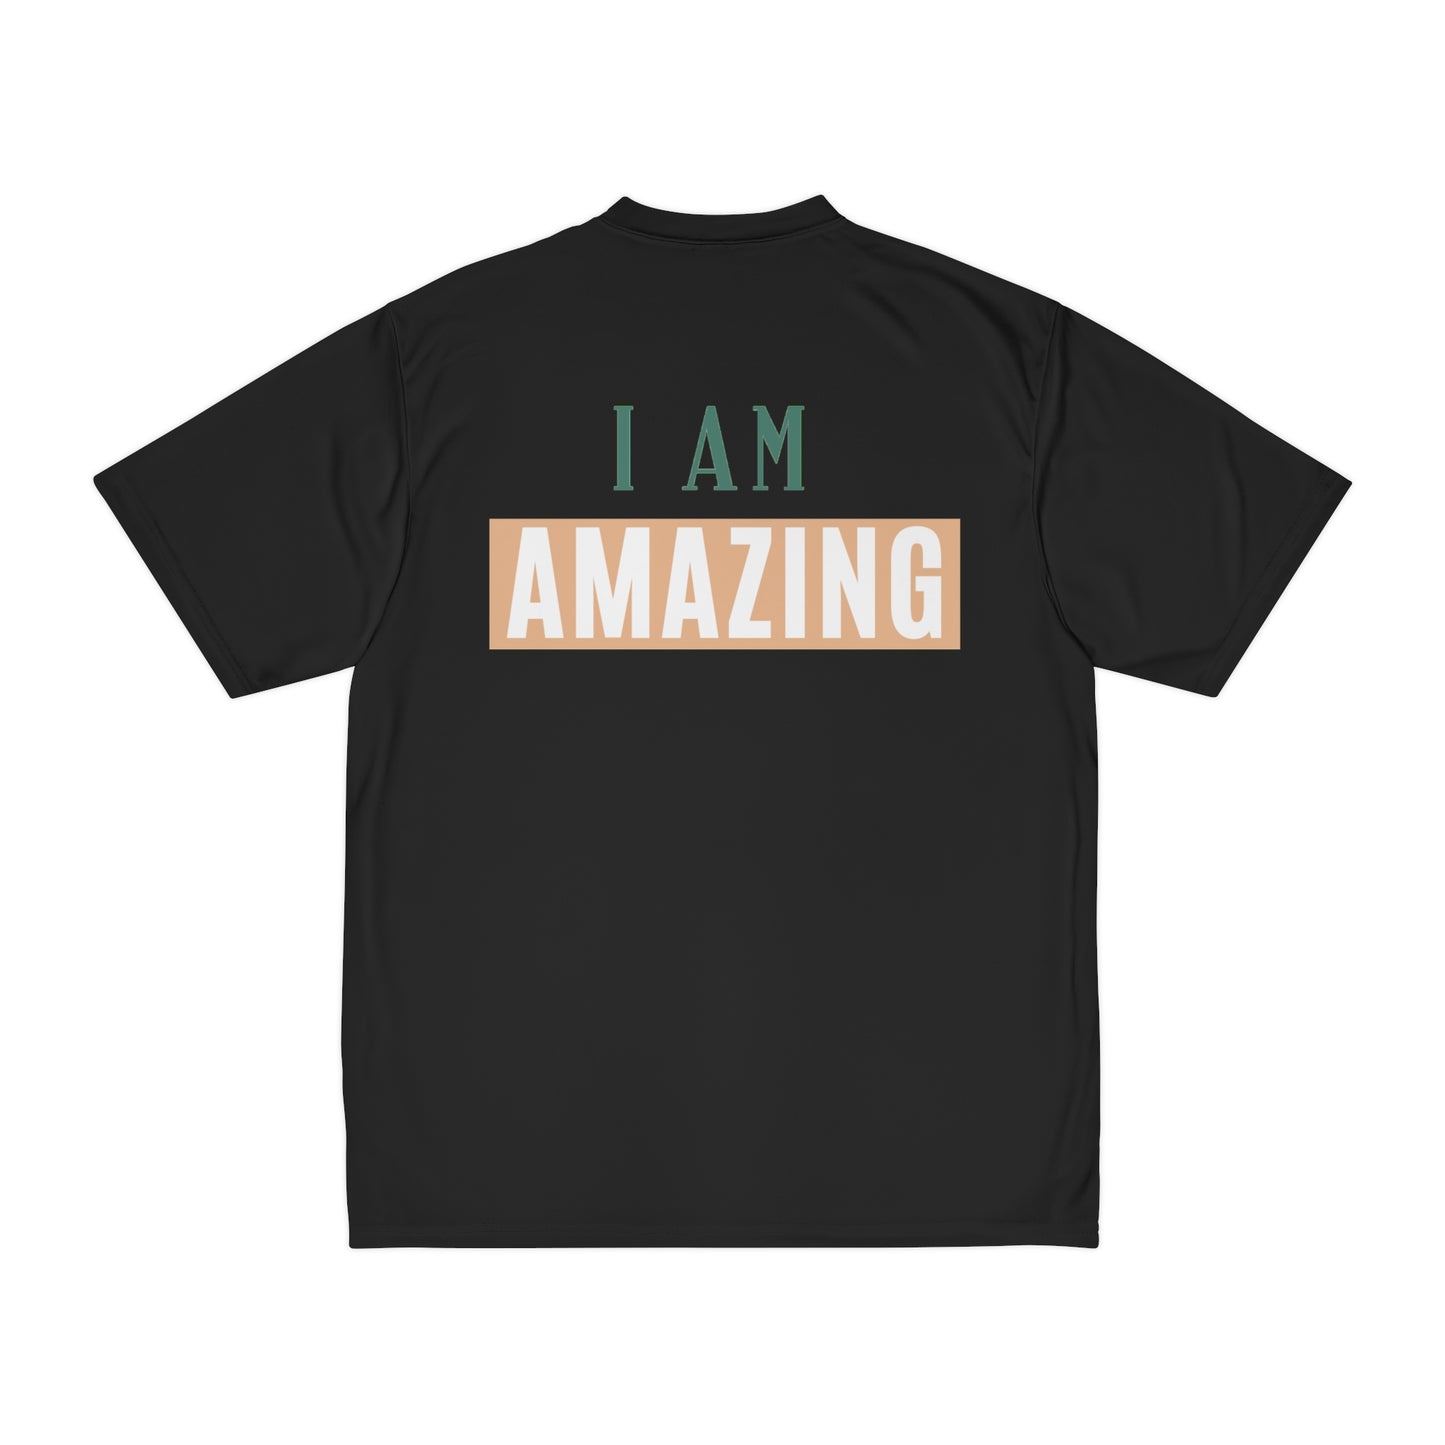 Men's Performance T-Shirt - I'm Amazing Father Brother Son Friend - Front and Back Printed Design